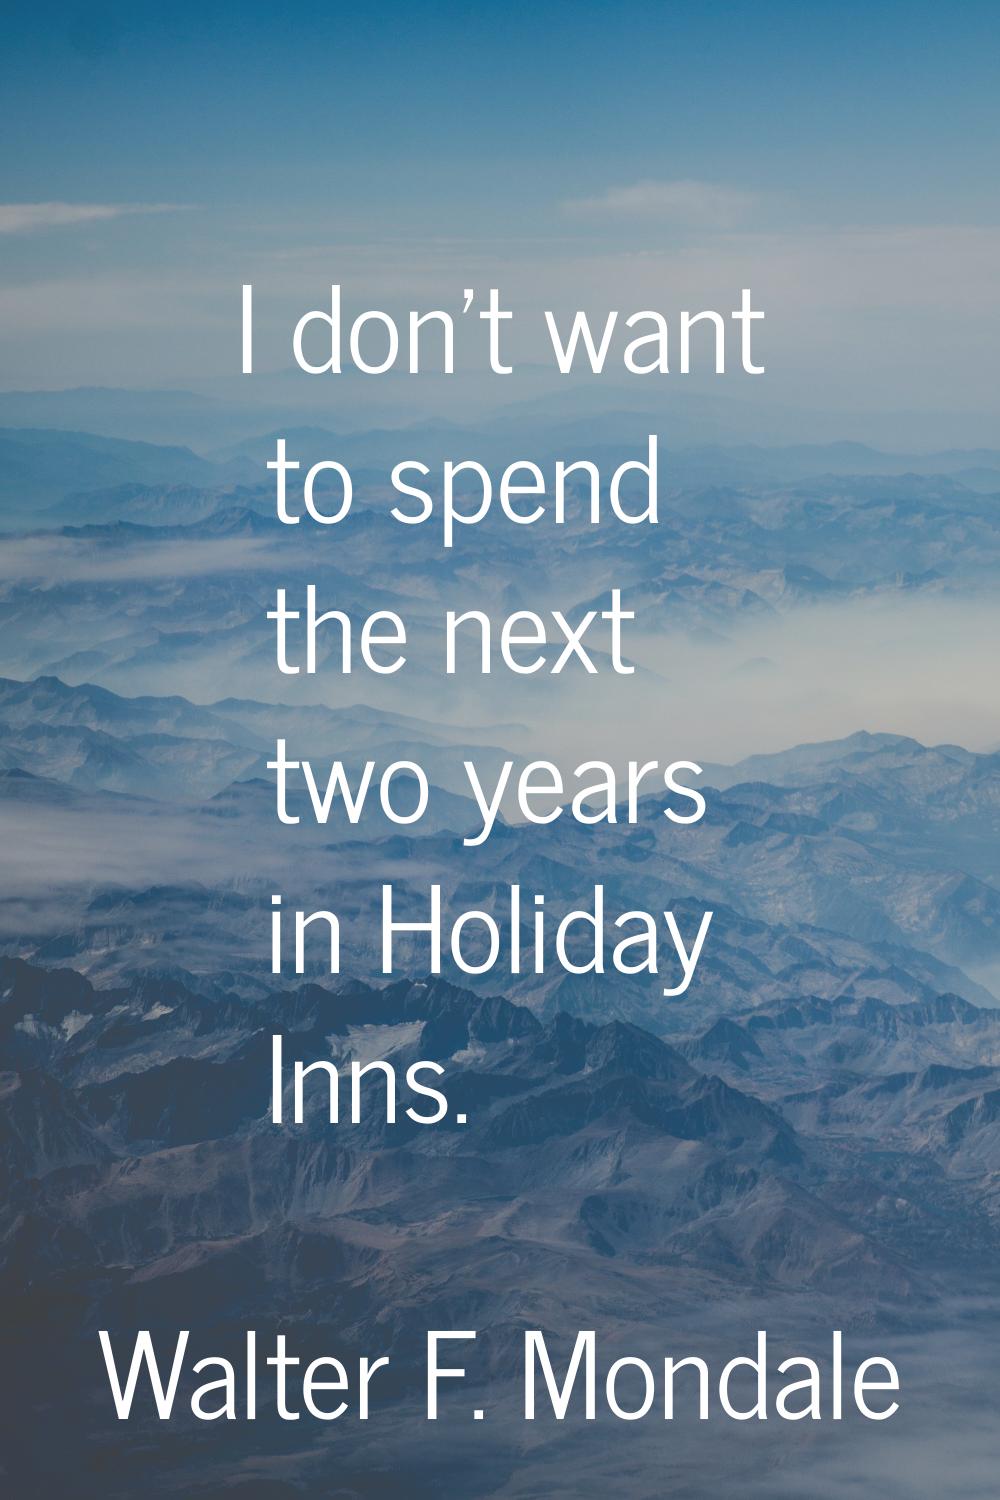 I don't want to spend the next two years in Holiday Inns.